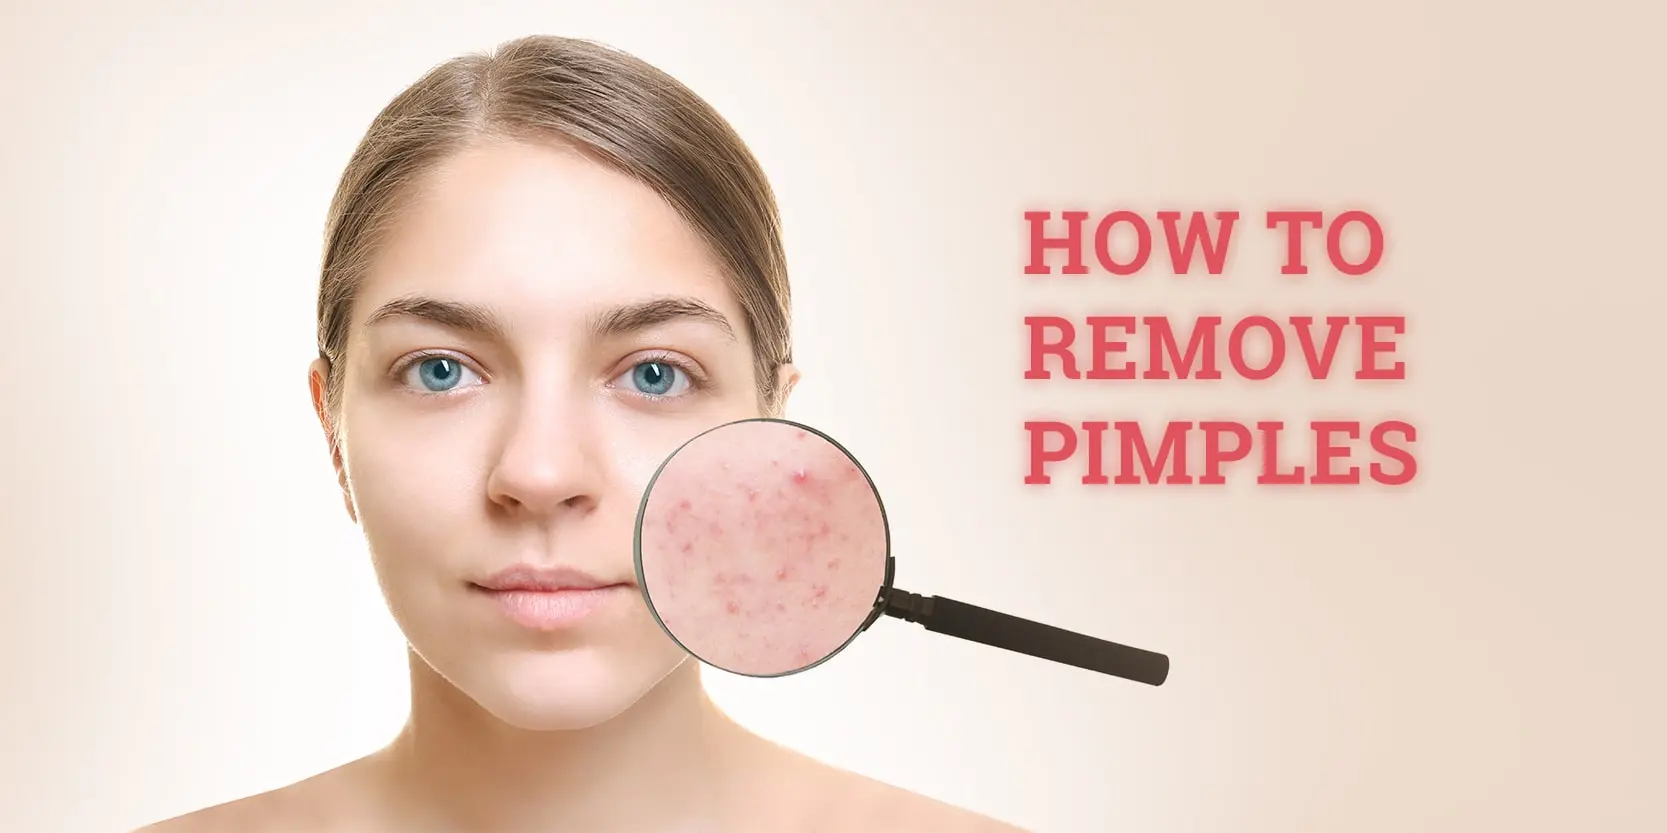 how to remove pimple (acne vulgaris)